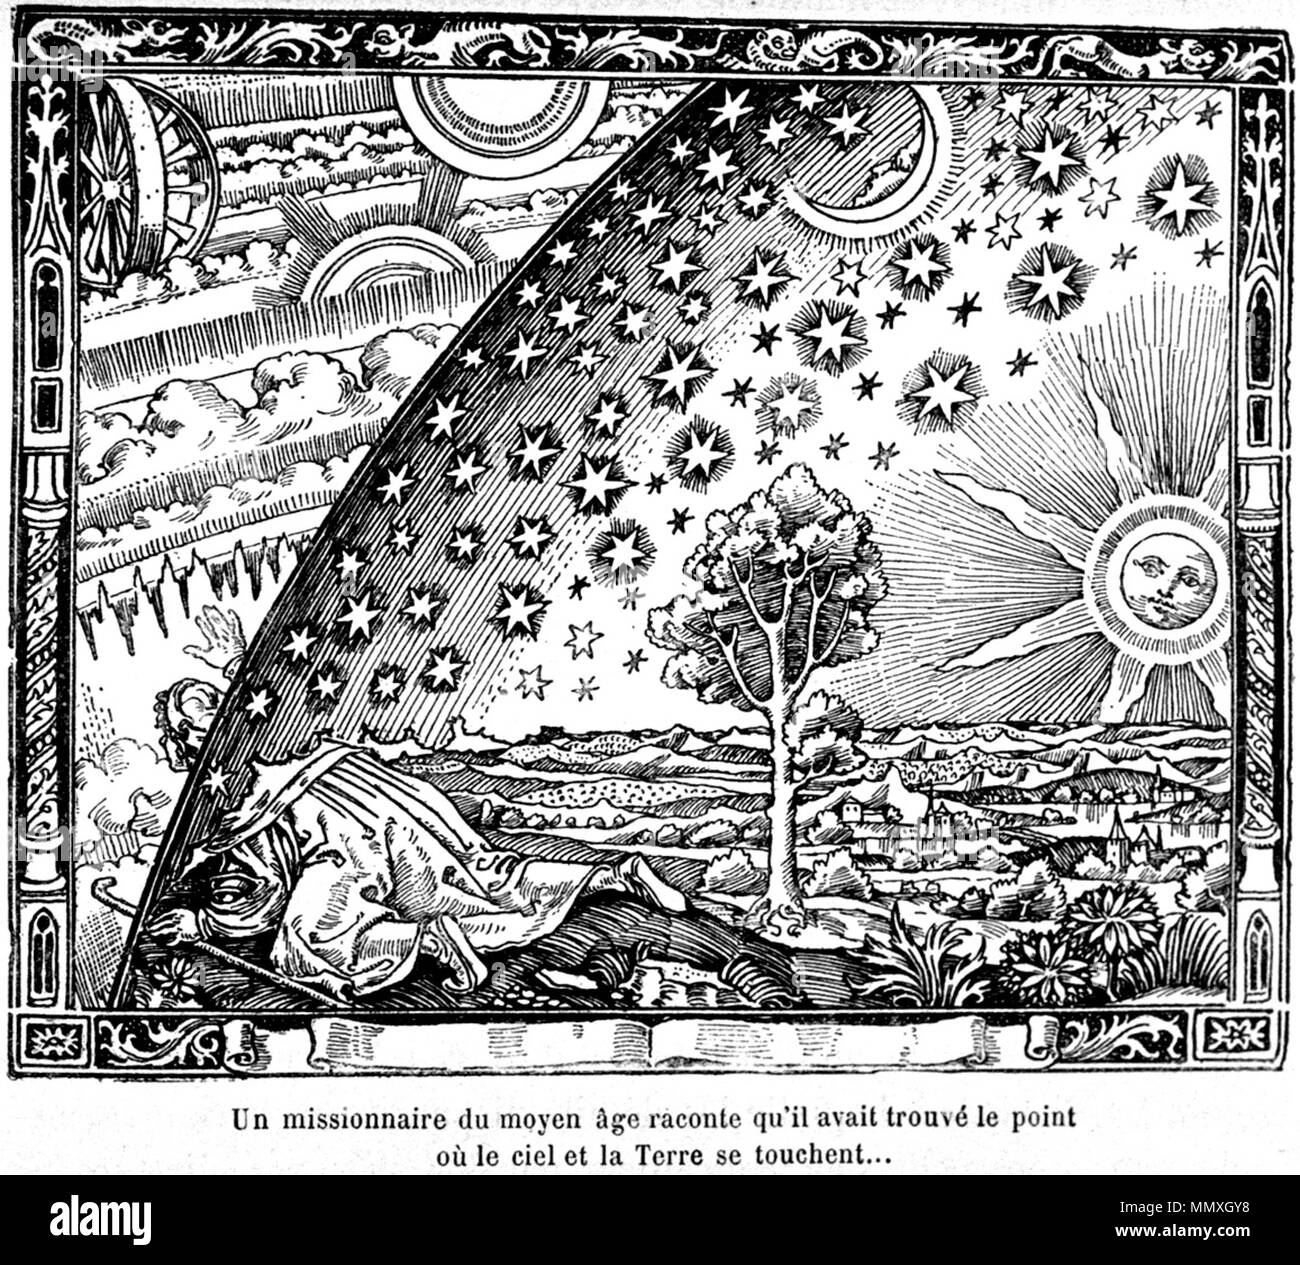 . English: The Flammarion engraving is a wood engraving by an unknown artist that first appeared in Camille Flammarion's L'atmosphère: météorologie populaire (1888). The image depicts a man crawling under the edge of the sky, depicted as if it were a solid hemisphere, to look at the mysterious Empyrean beyond. The caption translates to 'A medieval missionary tells that he has found the point where heaven and Earth meet...'  . 1888. Anonymous FlammarionWoodcut Stock Photo